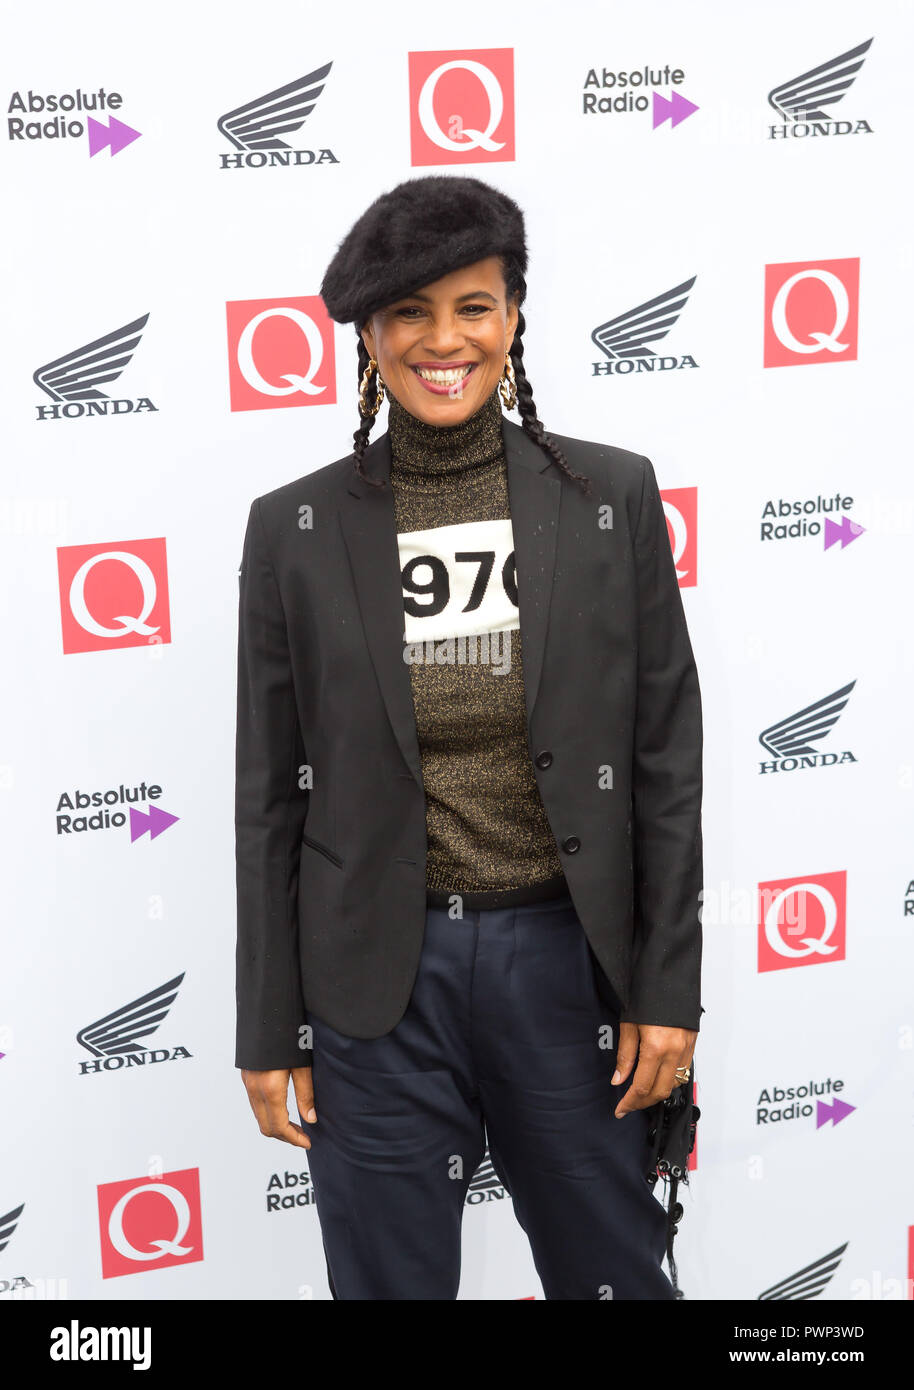 London, UK. 17th Oct, 2018. The Round House Chalk Farm  Neneh Cherry arrives at the Q Awards 2018 in Association with Absolute Radio Credit: Dean Fardell / Alamy Live News Feed / Alamy Live News Stock Photo